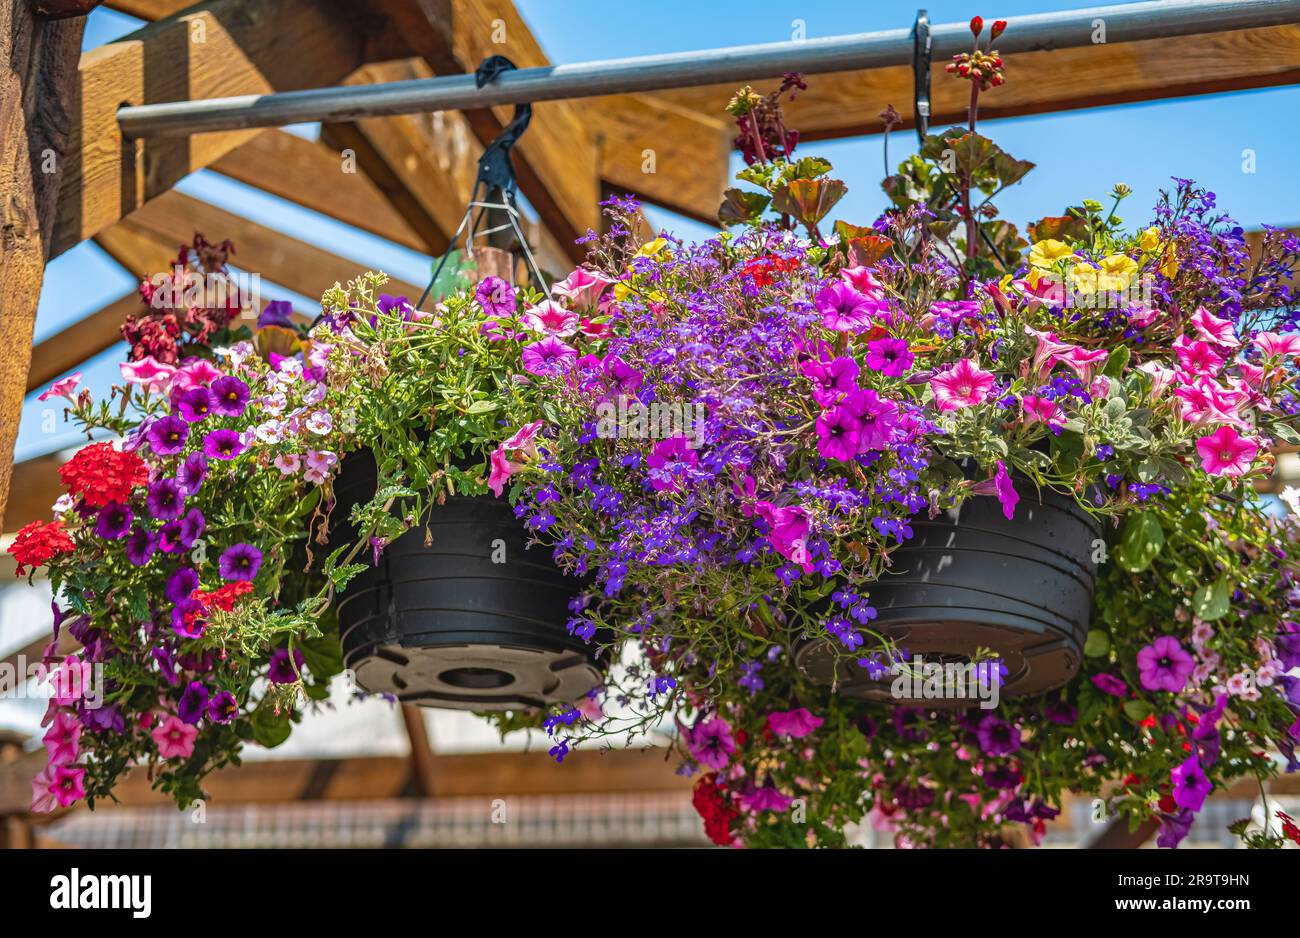 Baskets of hanging petunia flowers on balcony. Petunia flower ornamental plant. Purple and pink petunias in a hanging basket. Pots of bright calibrach Stock Photo